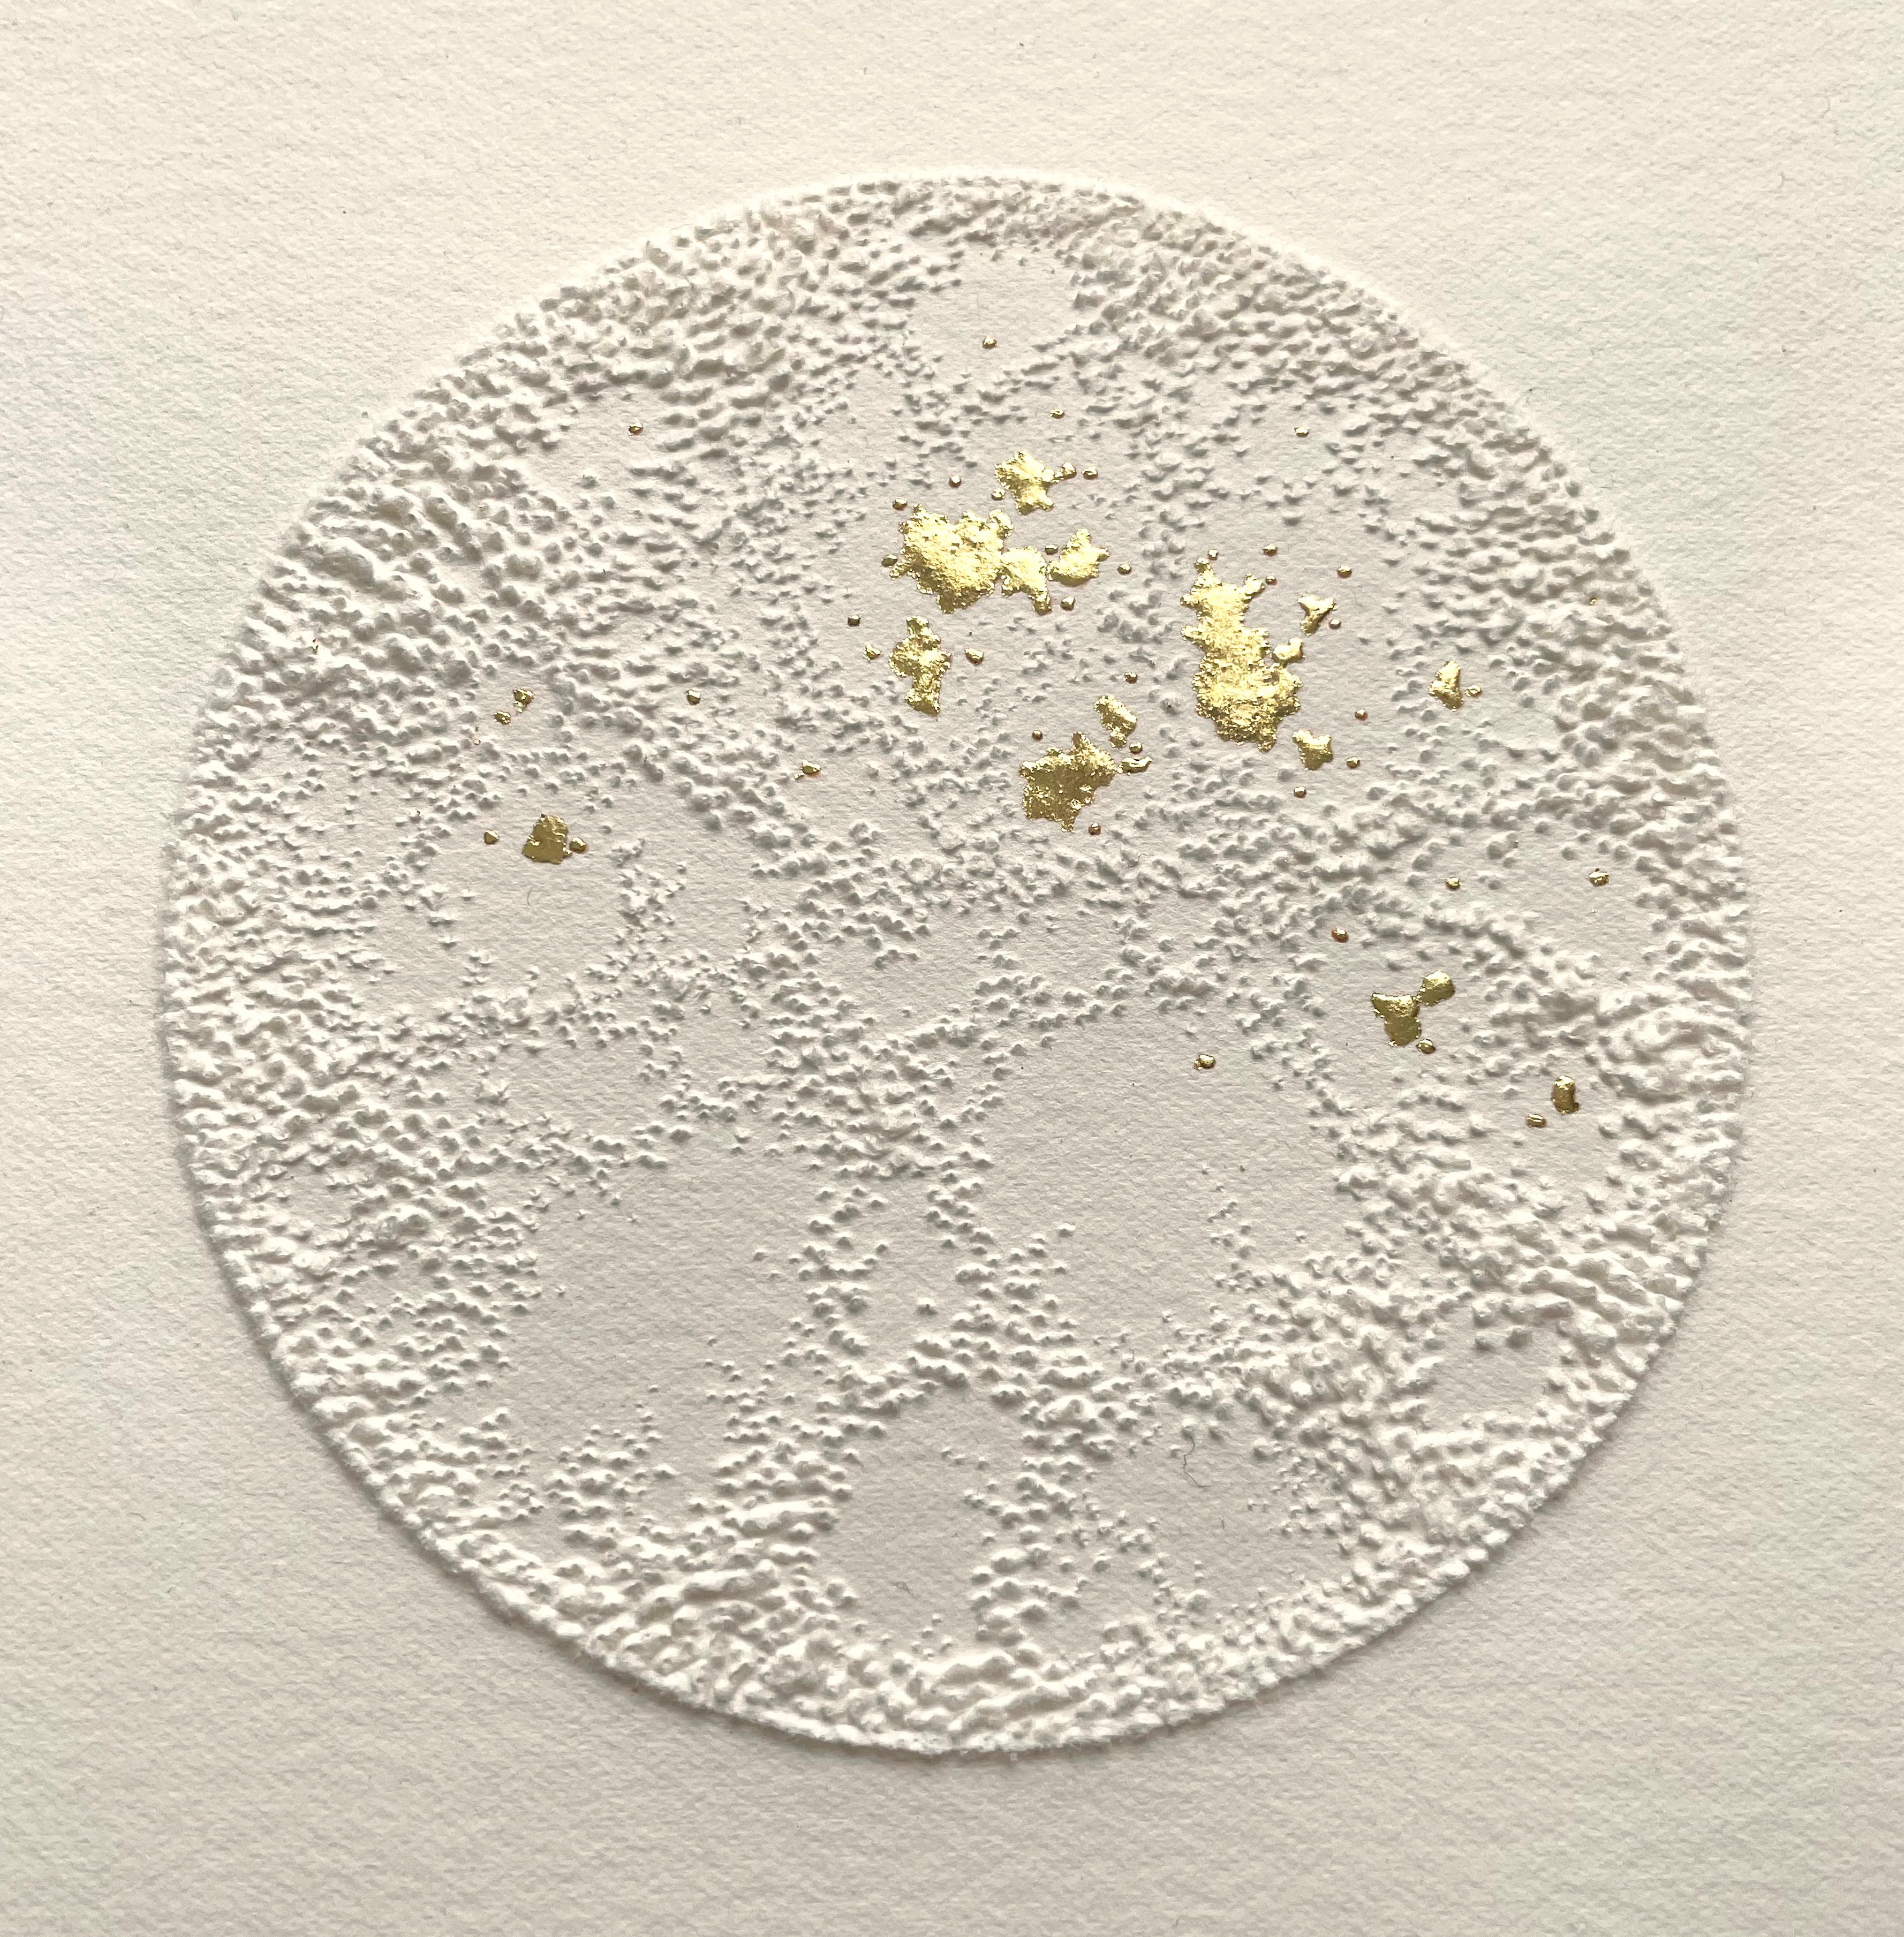 Moon 4- white 3D abstract circle with gold leaves and pulled paper fiber - Sculpture by Antonin Anzil